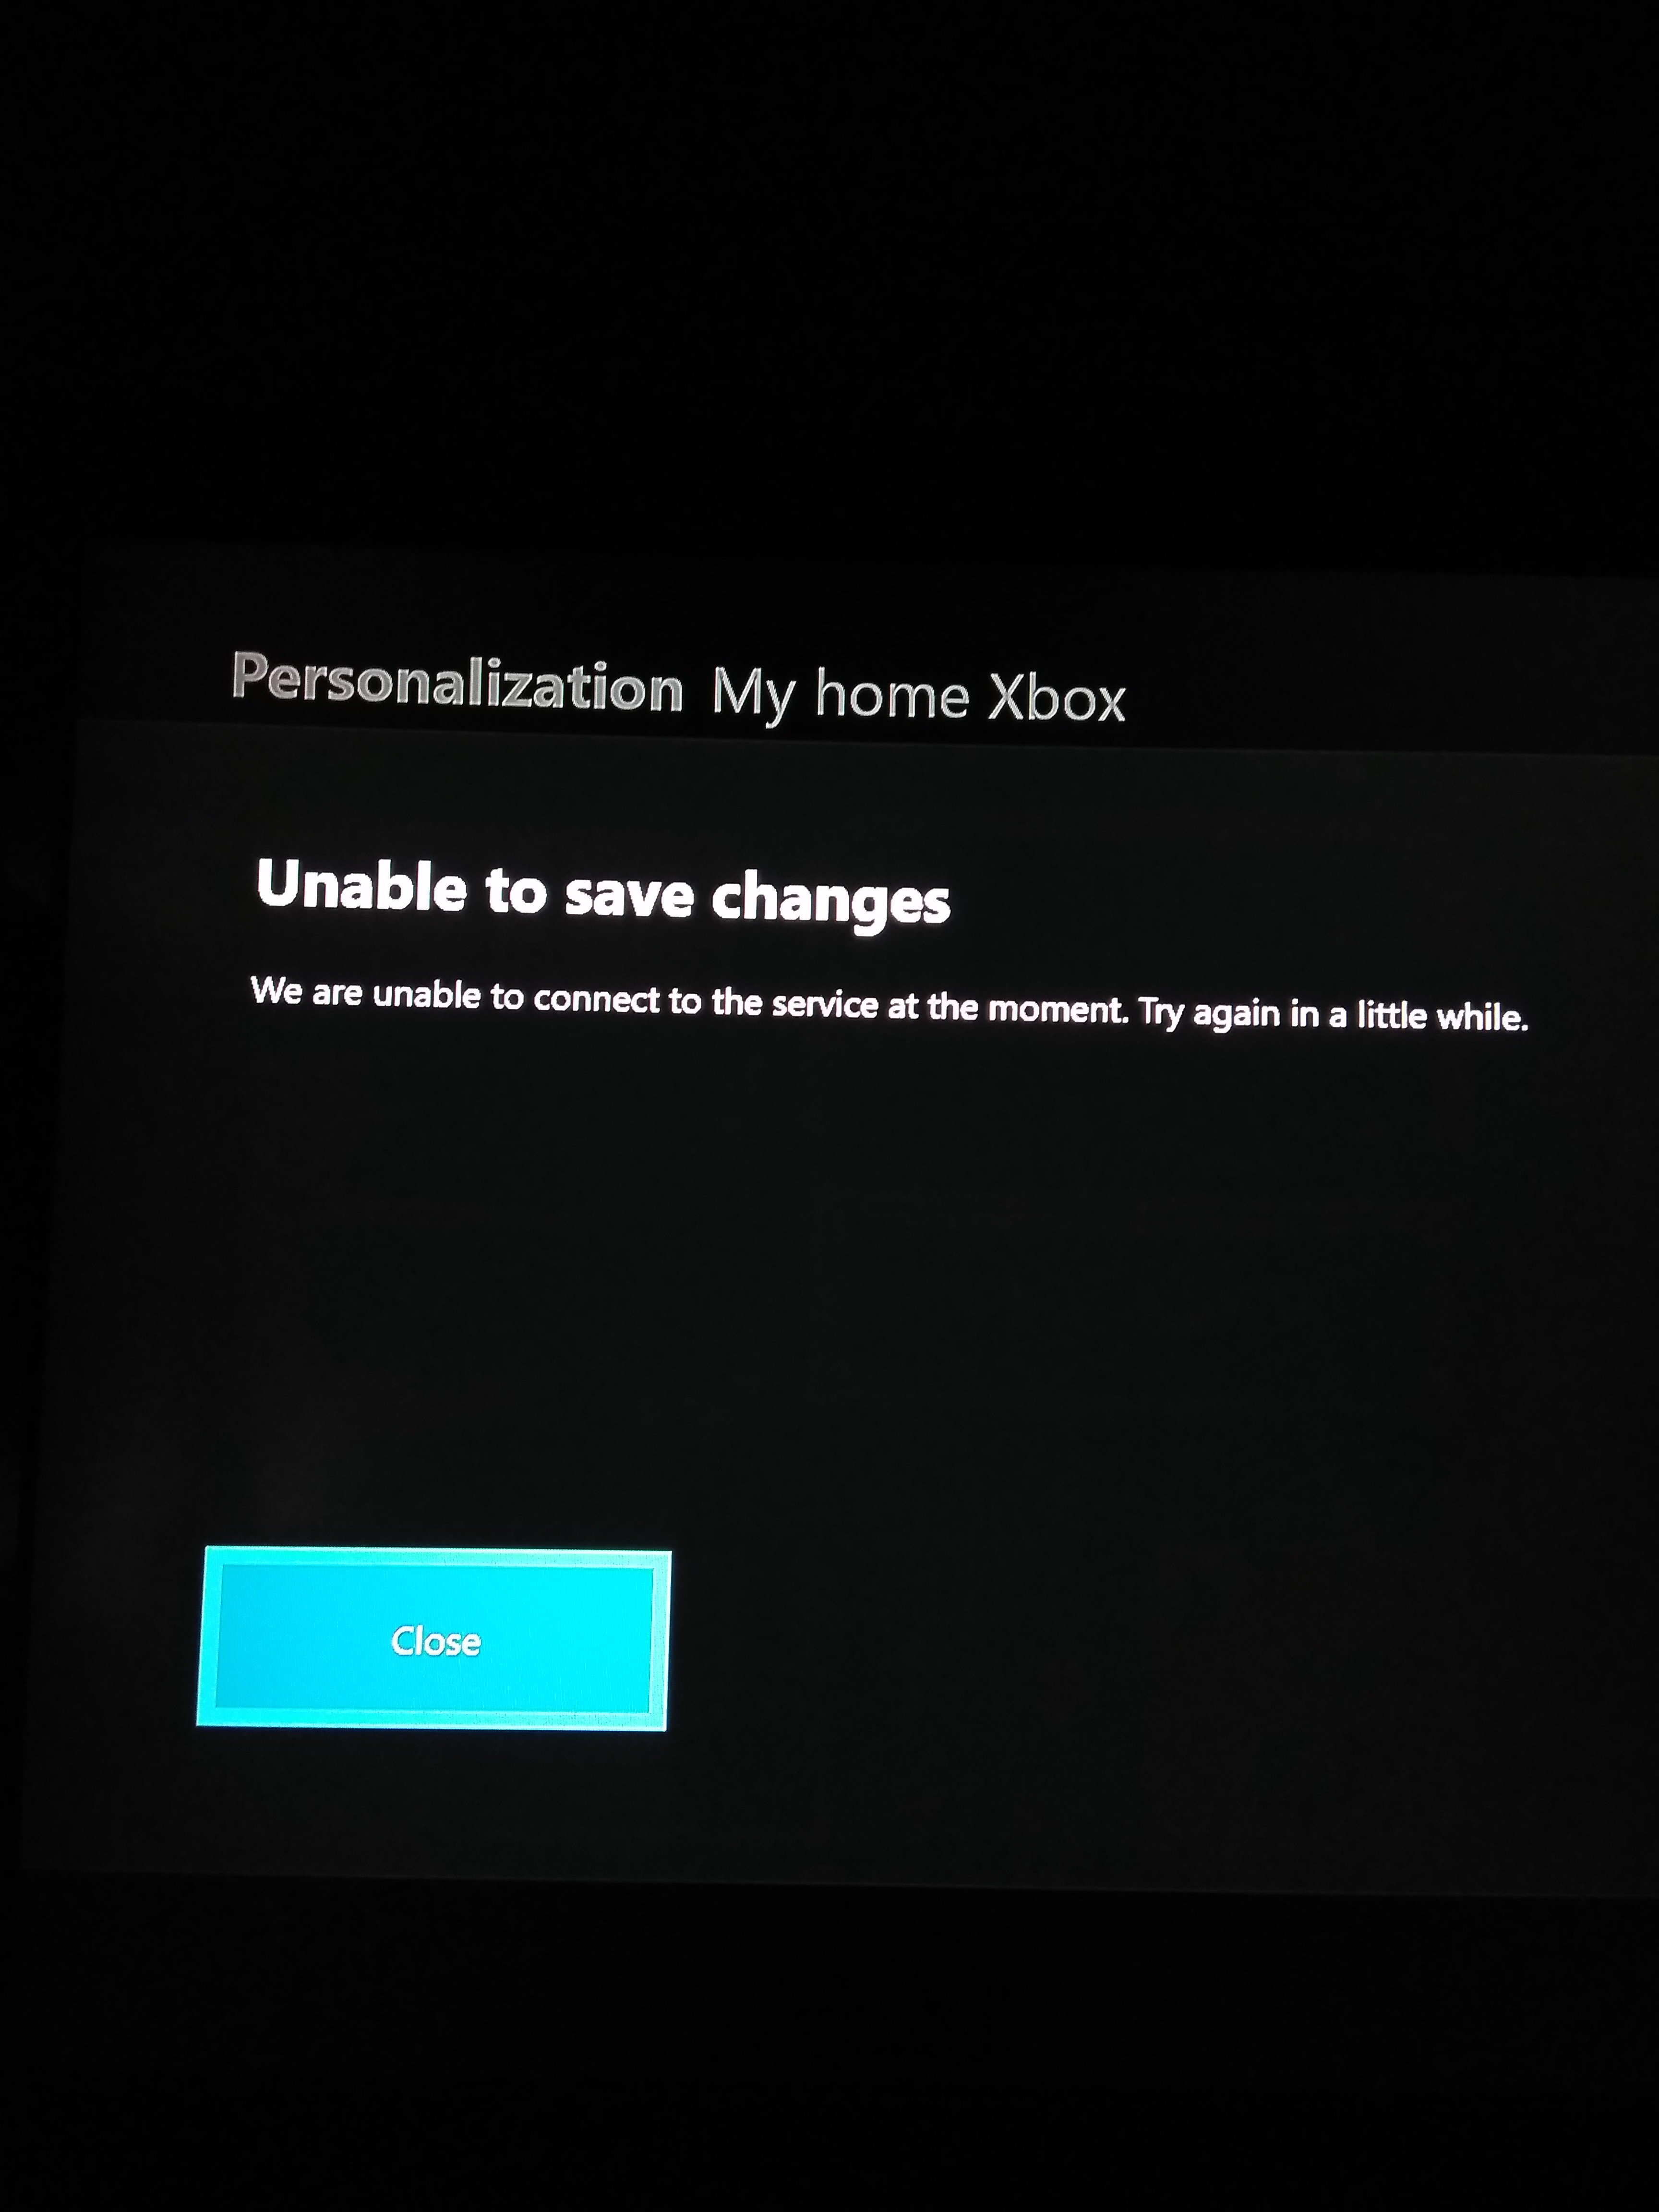 where is my home xbox